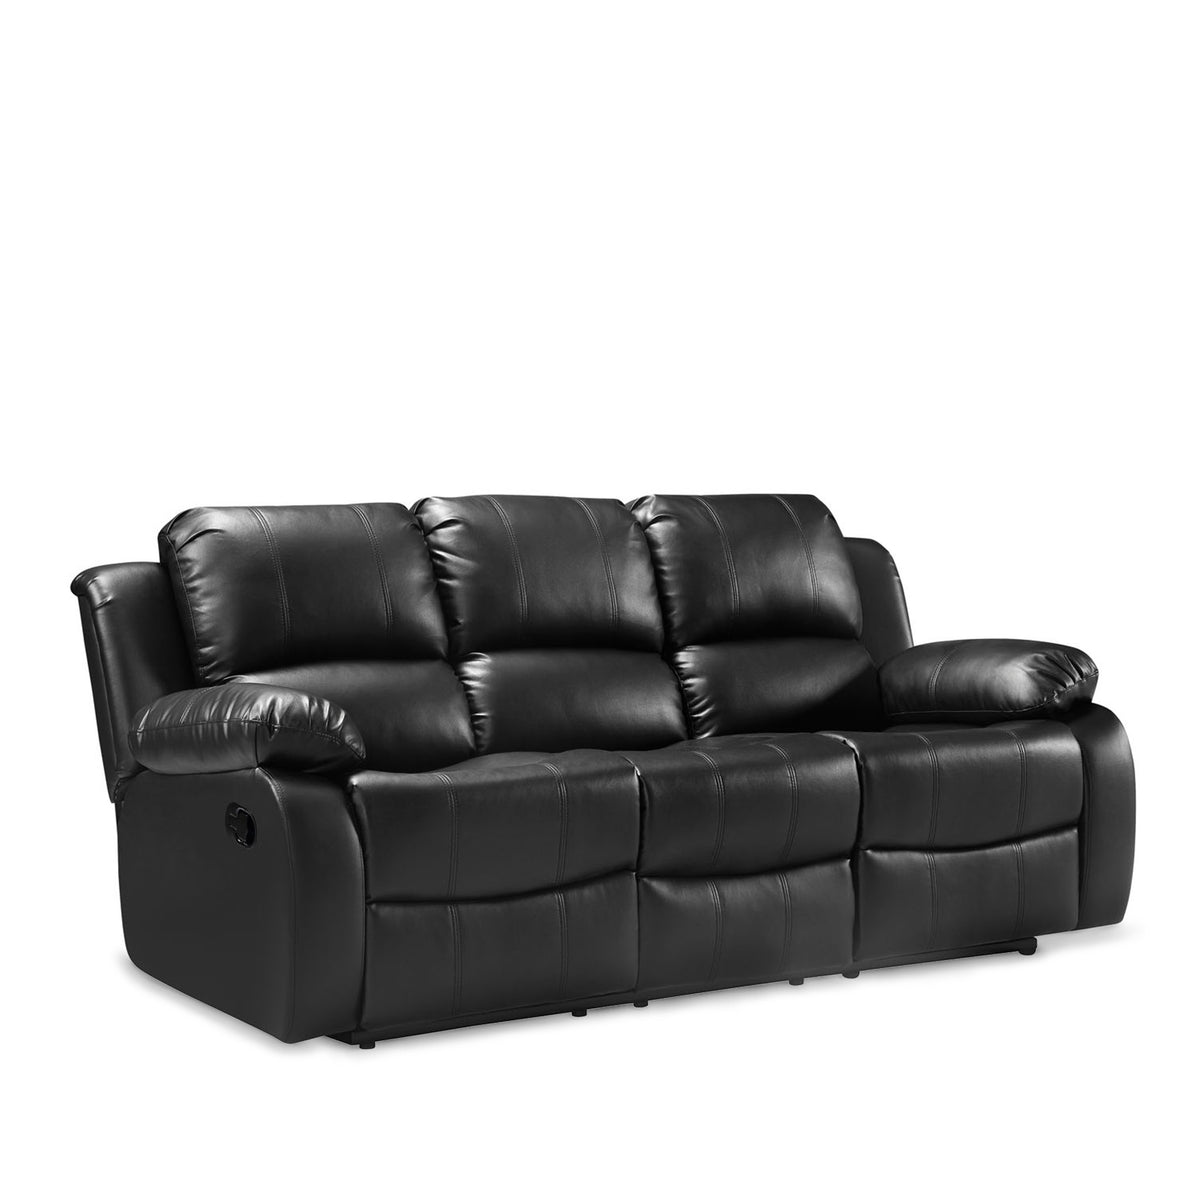 Valencia Black 3 Seater Reclining Air Leather Sofa by Roseland Furniture